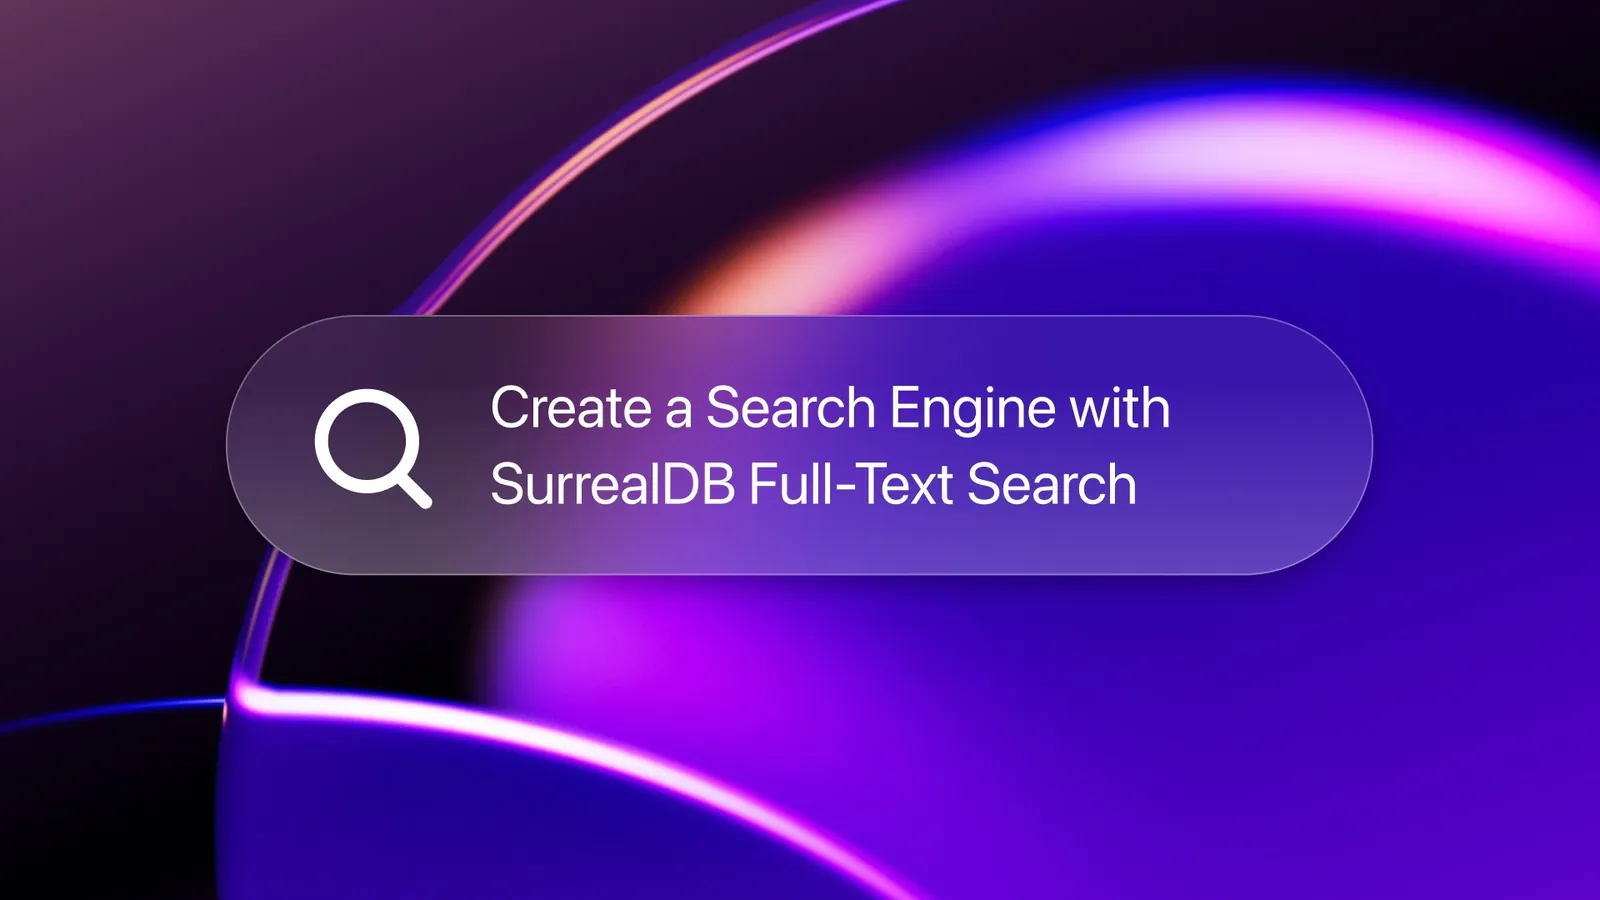 Create a Search Engine with SurrealDB Full-Text Search